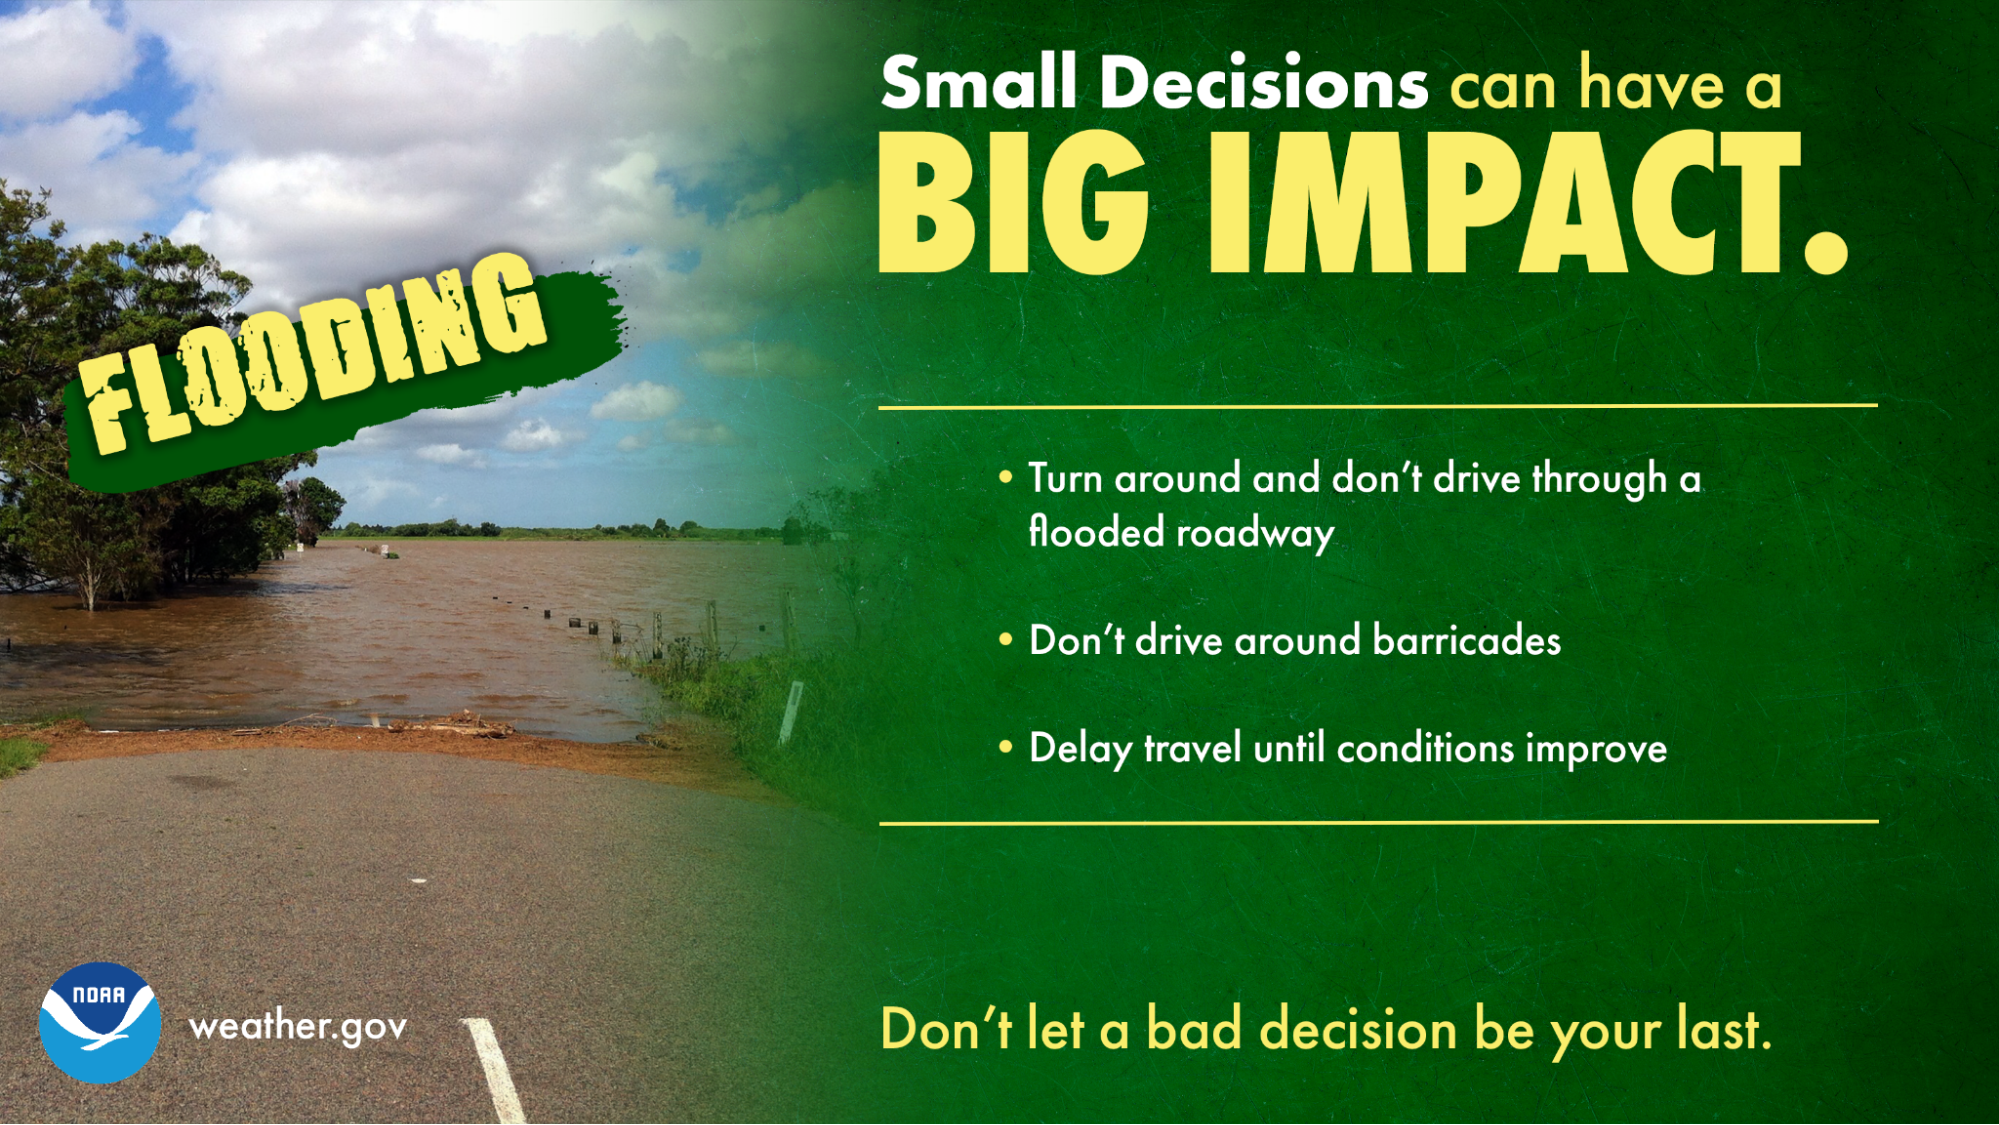 When encountering flooded roads or walkways, Turn Around, Don’t Drown. 